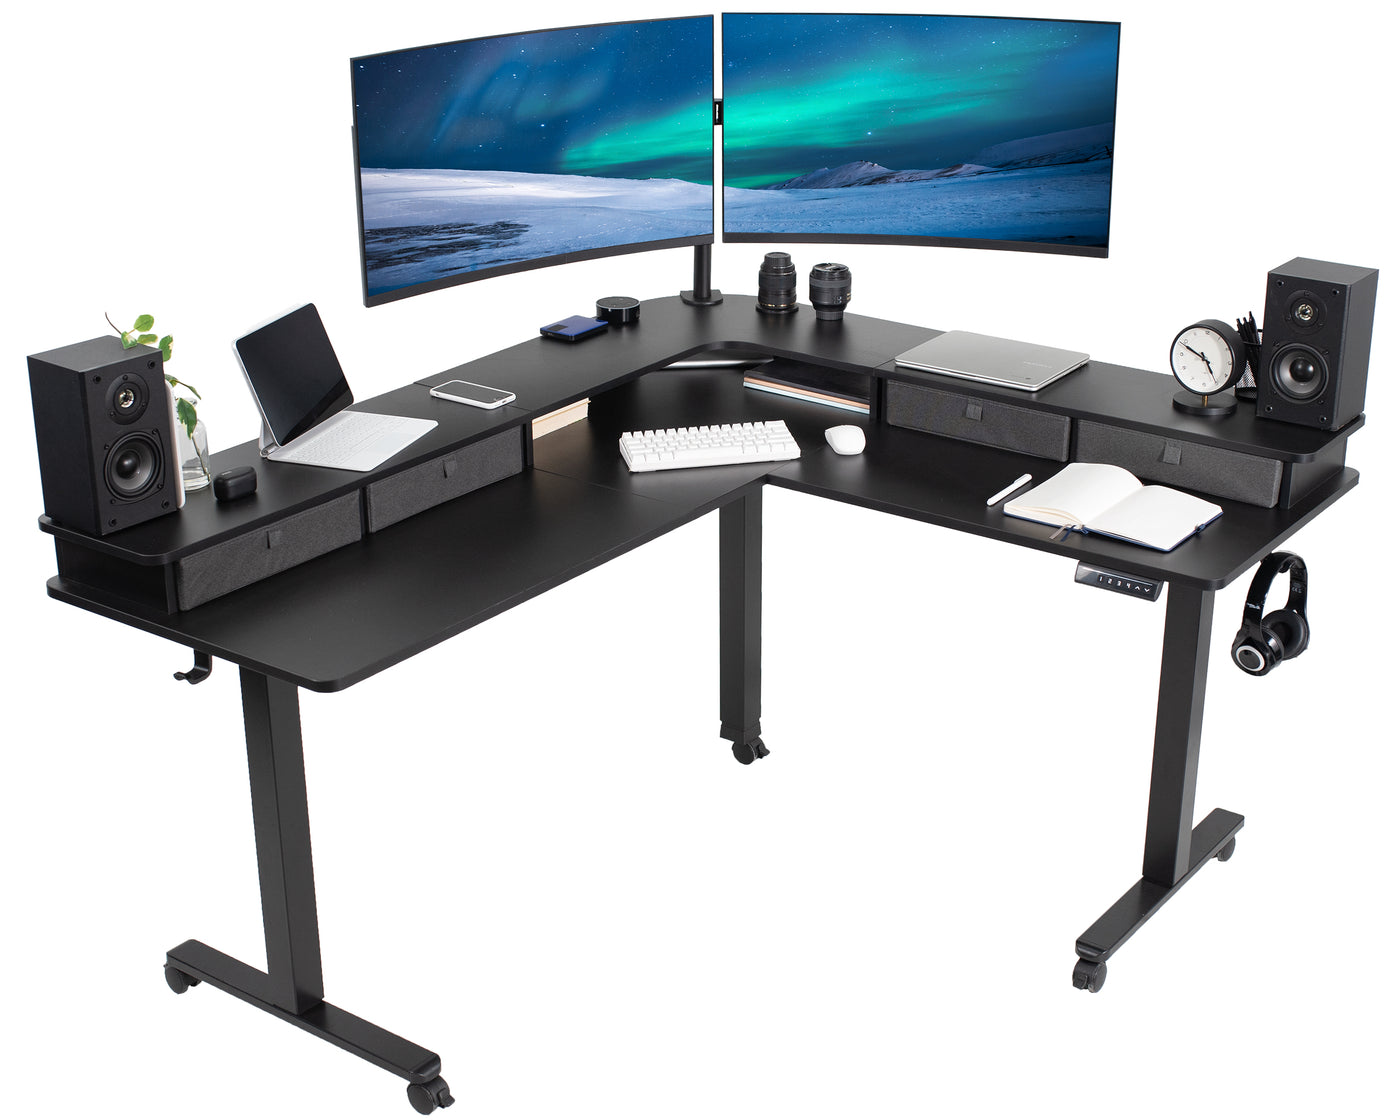 Dual-tier height adjustable electric corner desk with built-in shelving